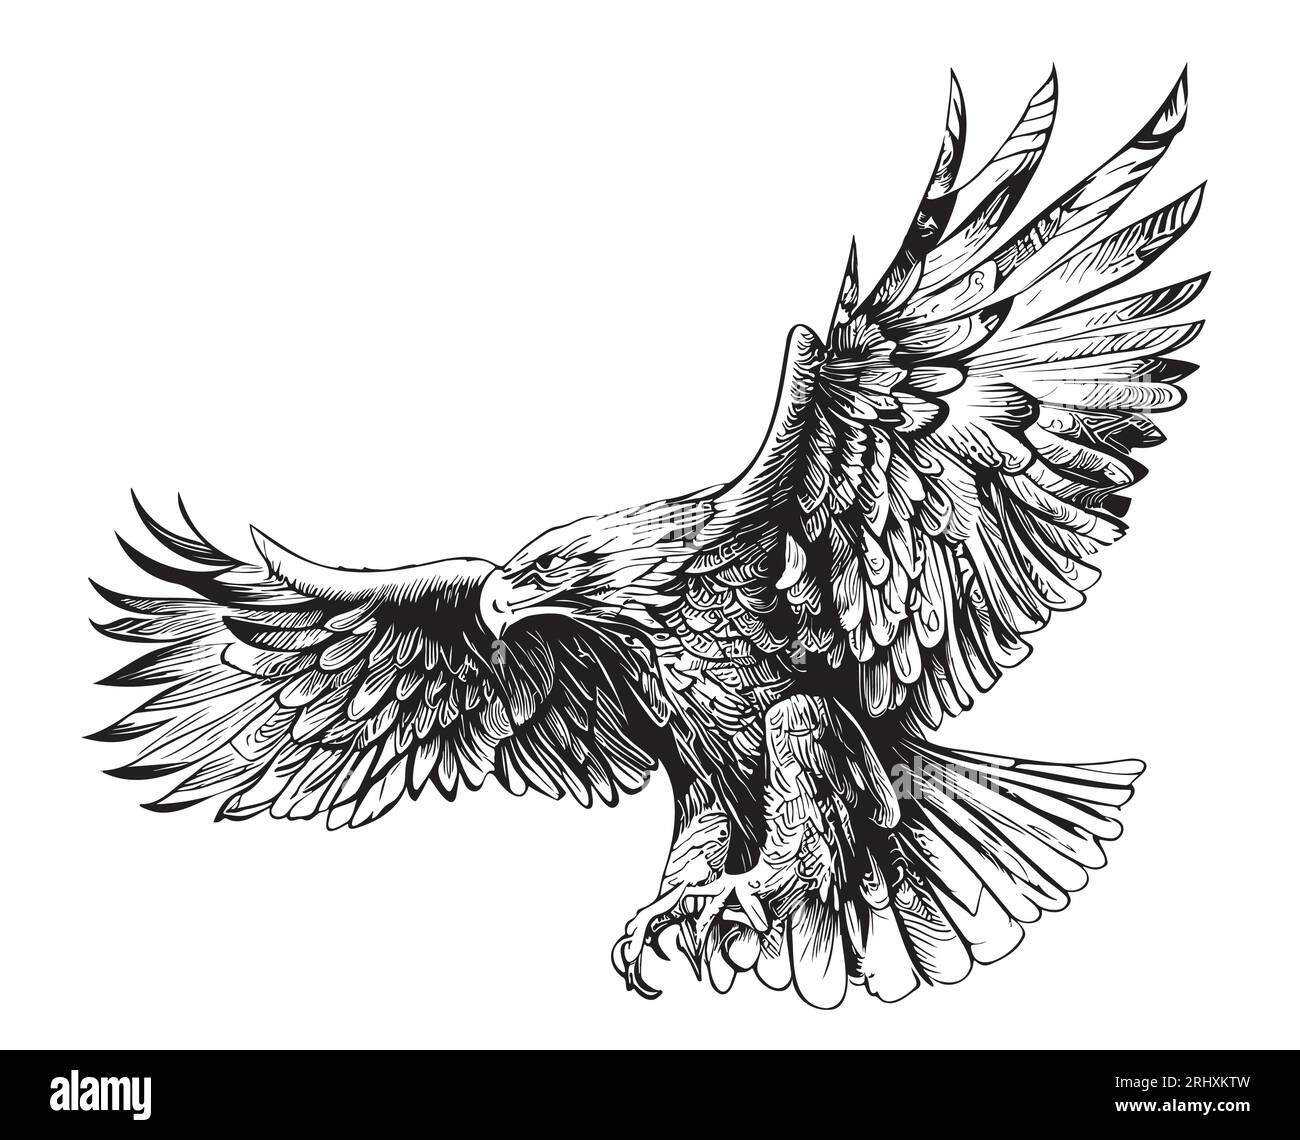 Eagle attacking sketch hand drawn engraving style illustration Stock Vector